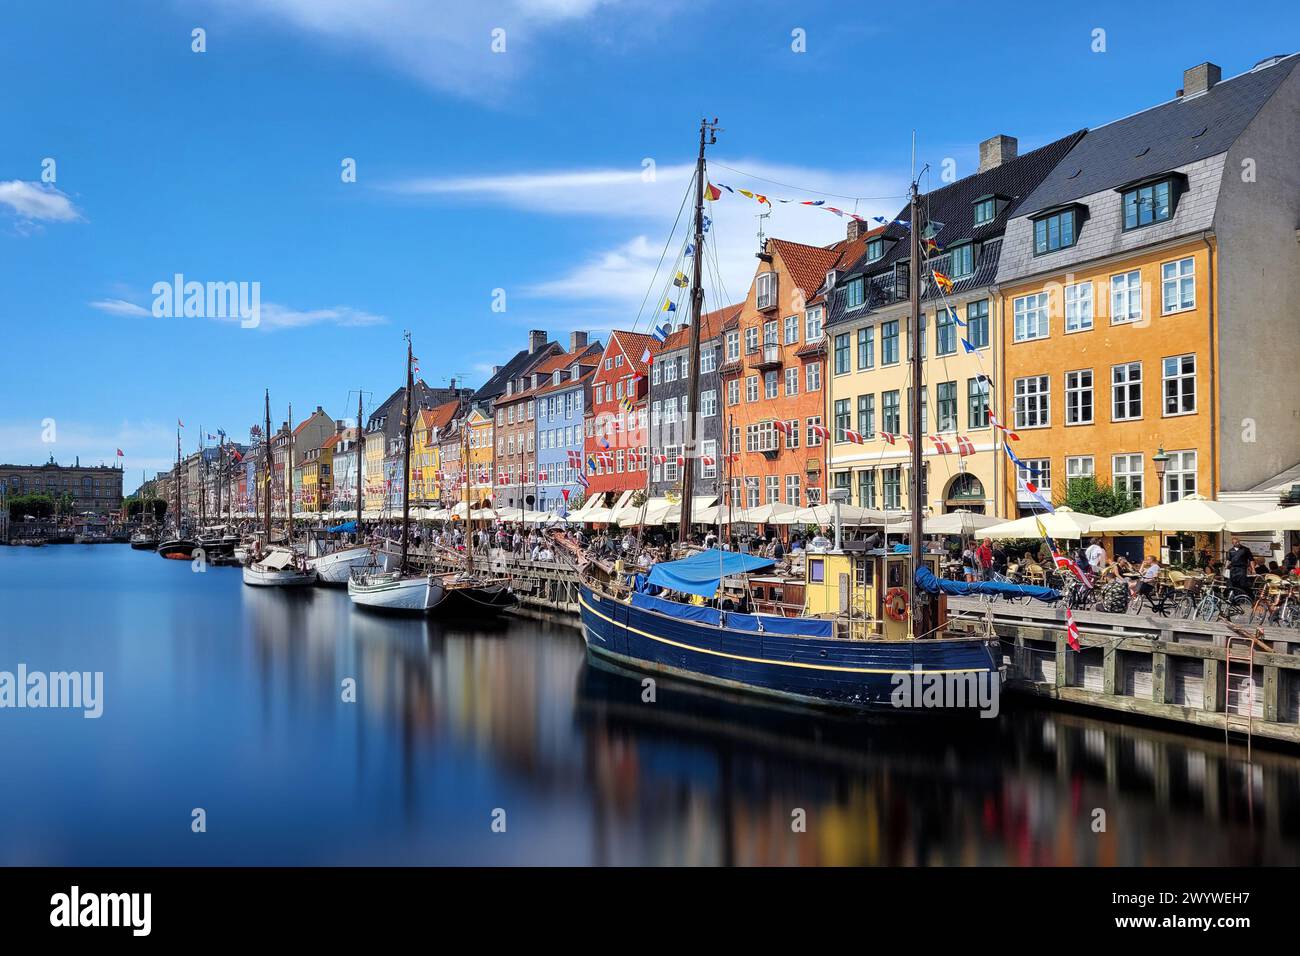 Boats and colorful buildings in Nyhavn Harbor (or New Port), Copenhagen, Denmark Stock Photo